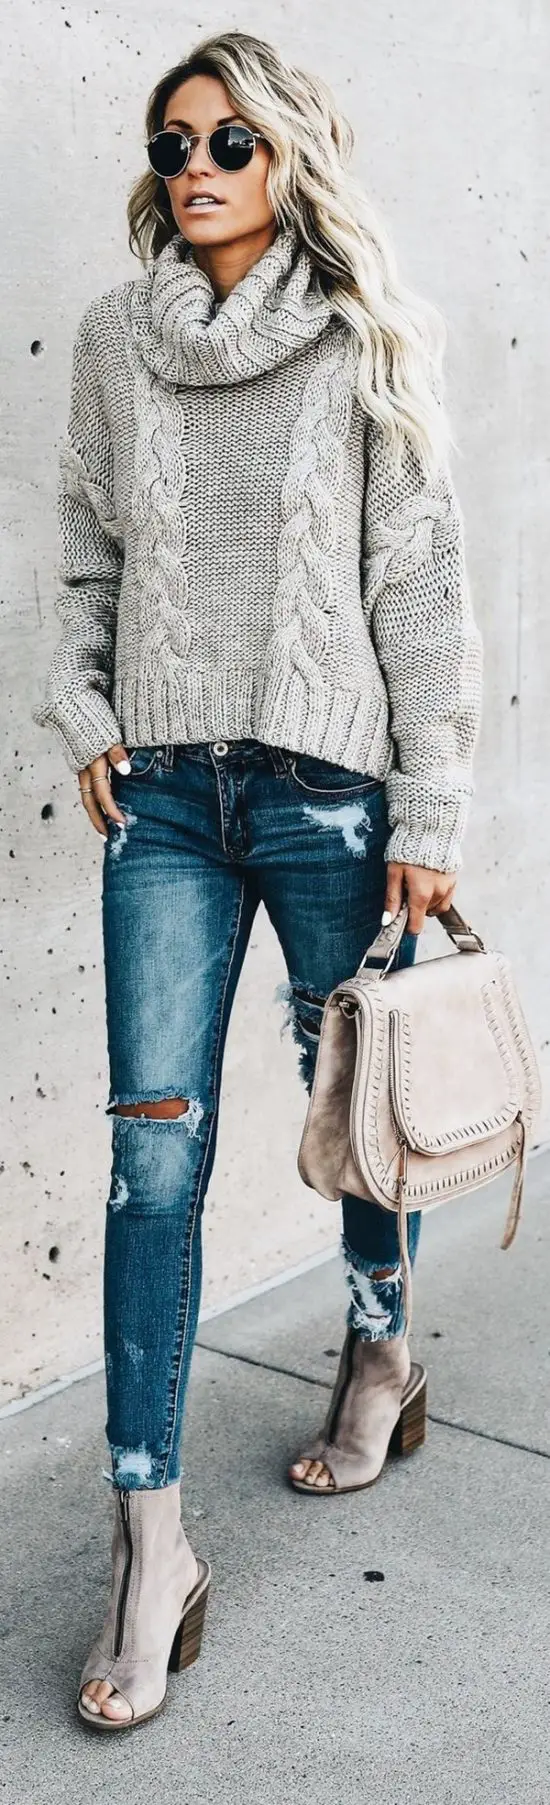 45 Cute Winter Outfit Ideas For Teens 2018